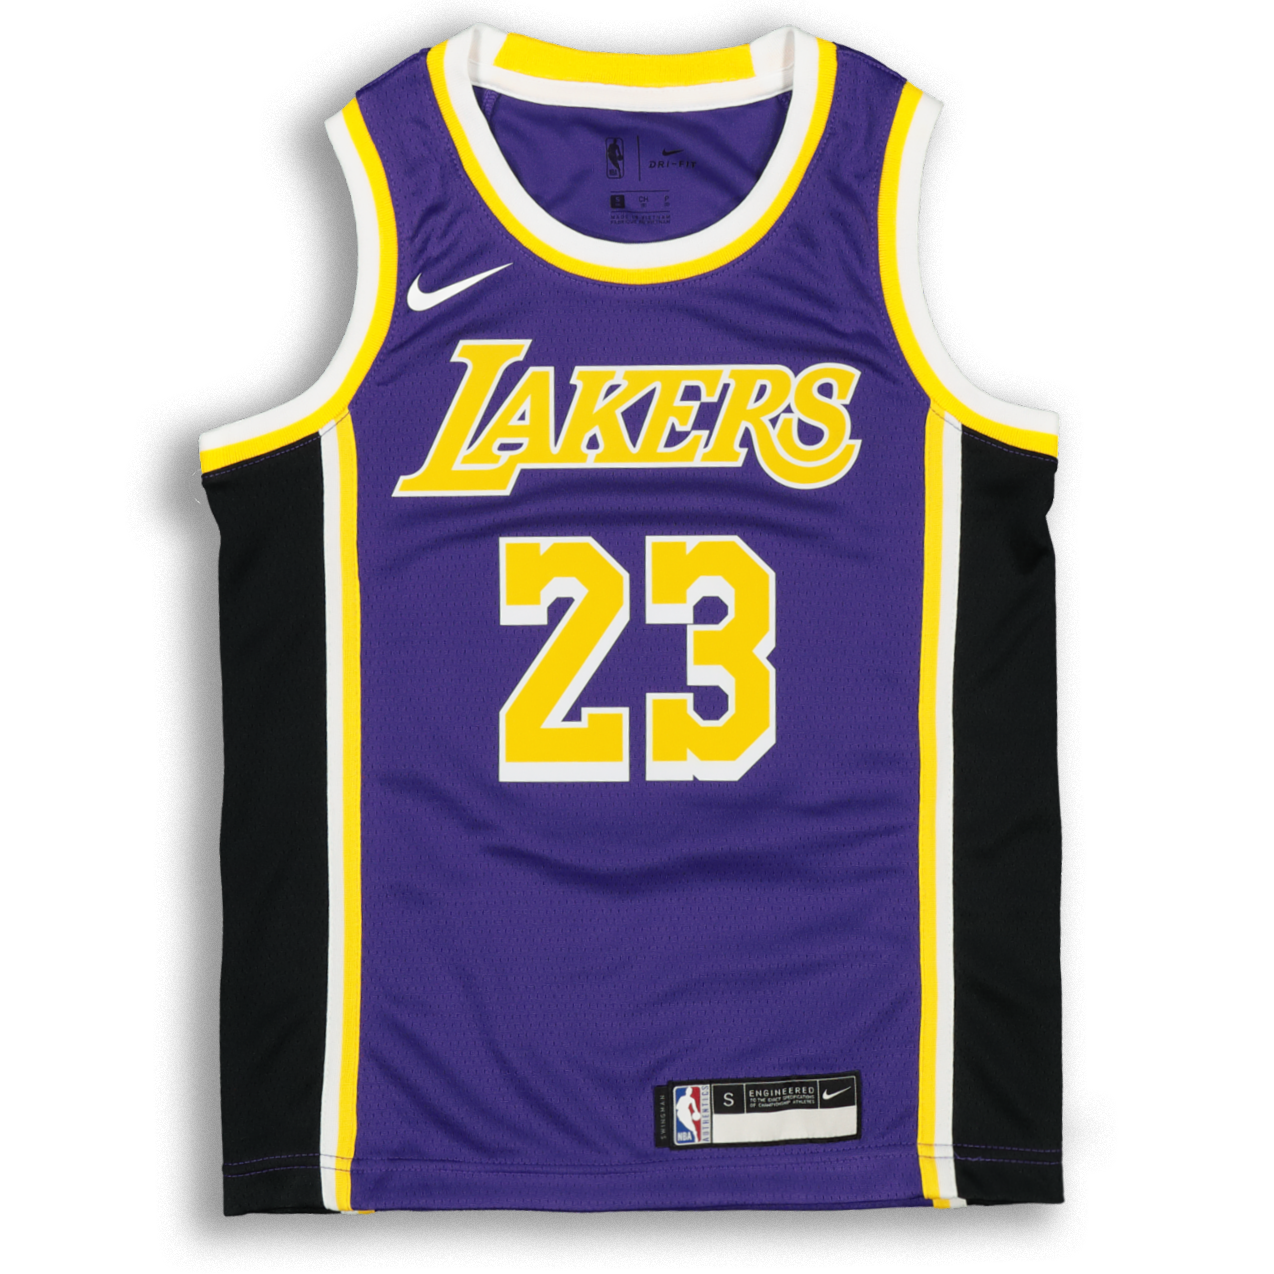 lebron james jersey for boys Off 62% - www.bashhguidelines.org